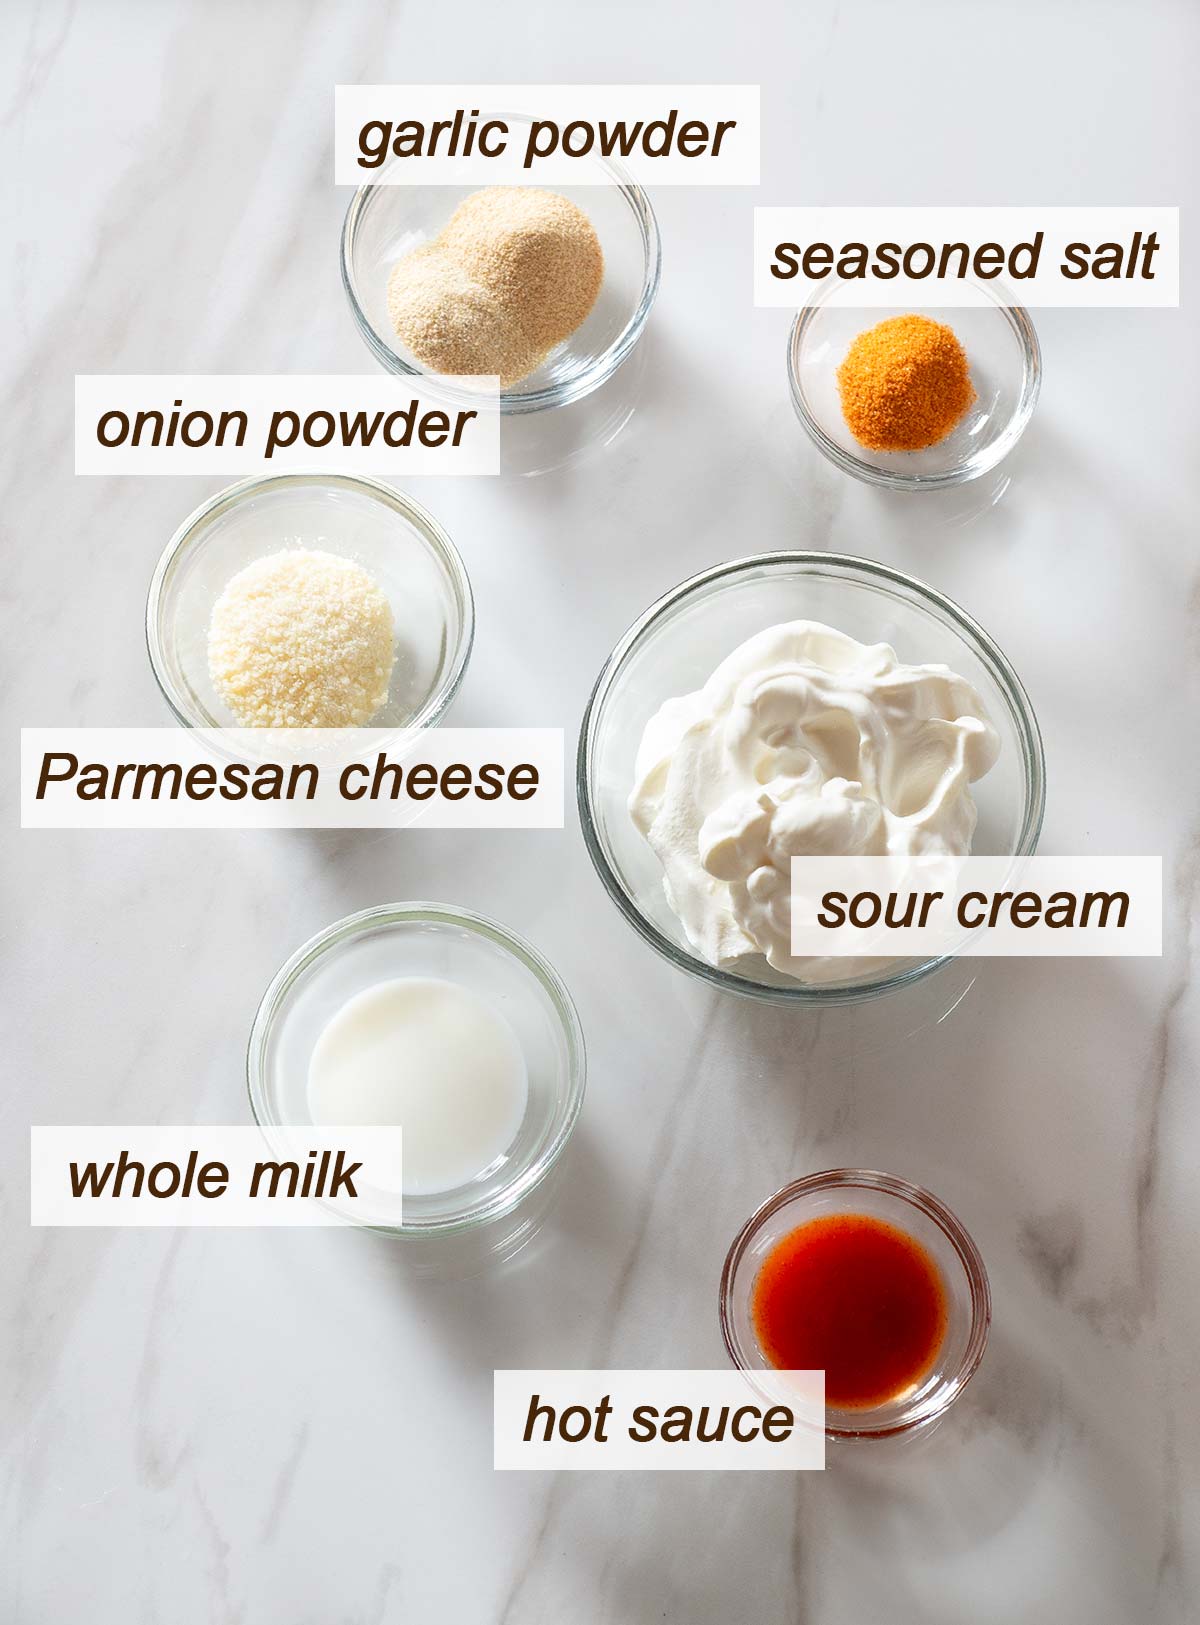 Sour cream dipping sauce ingredients on a table.